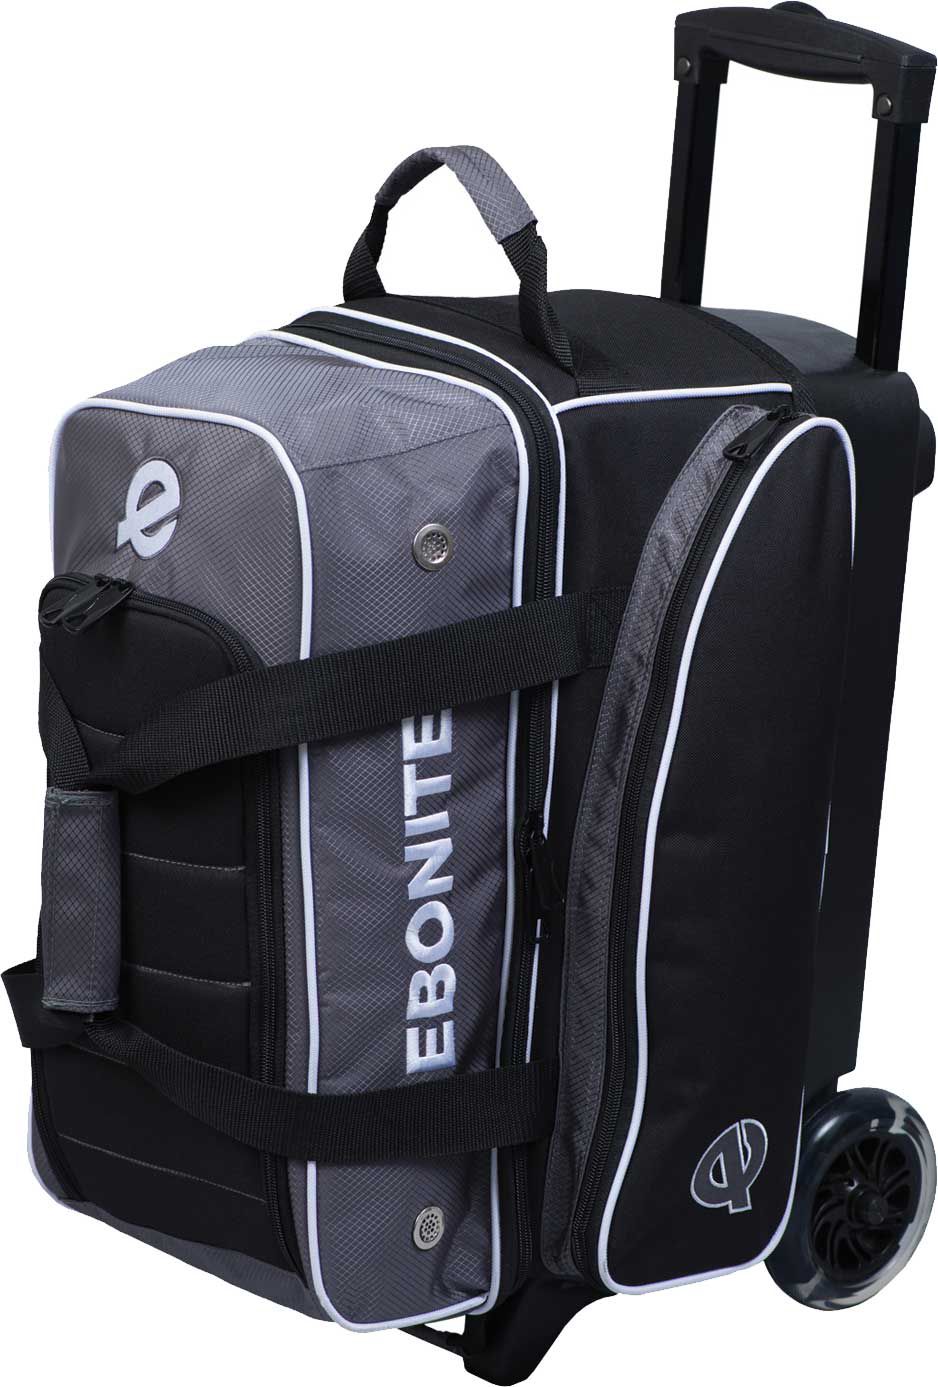 Bowling Bags & Bowling Ball Bags | Best Price Guarantee at DICK'S